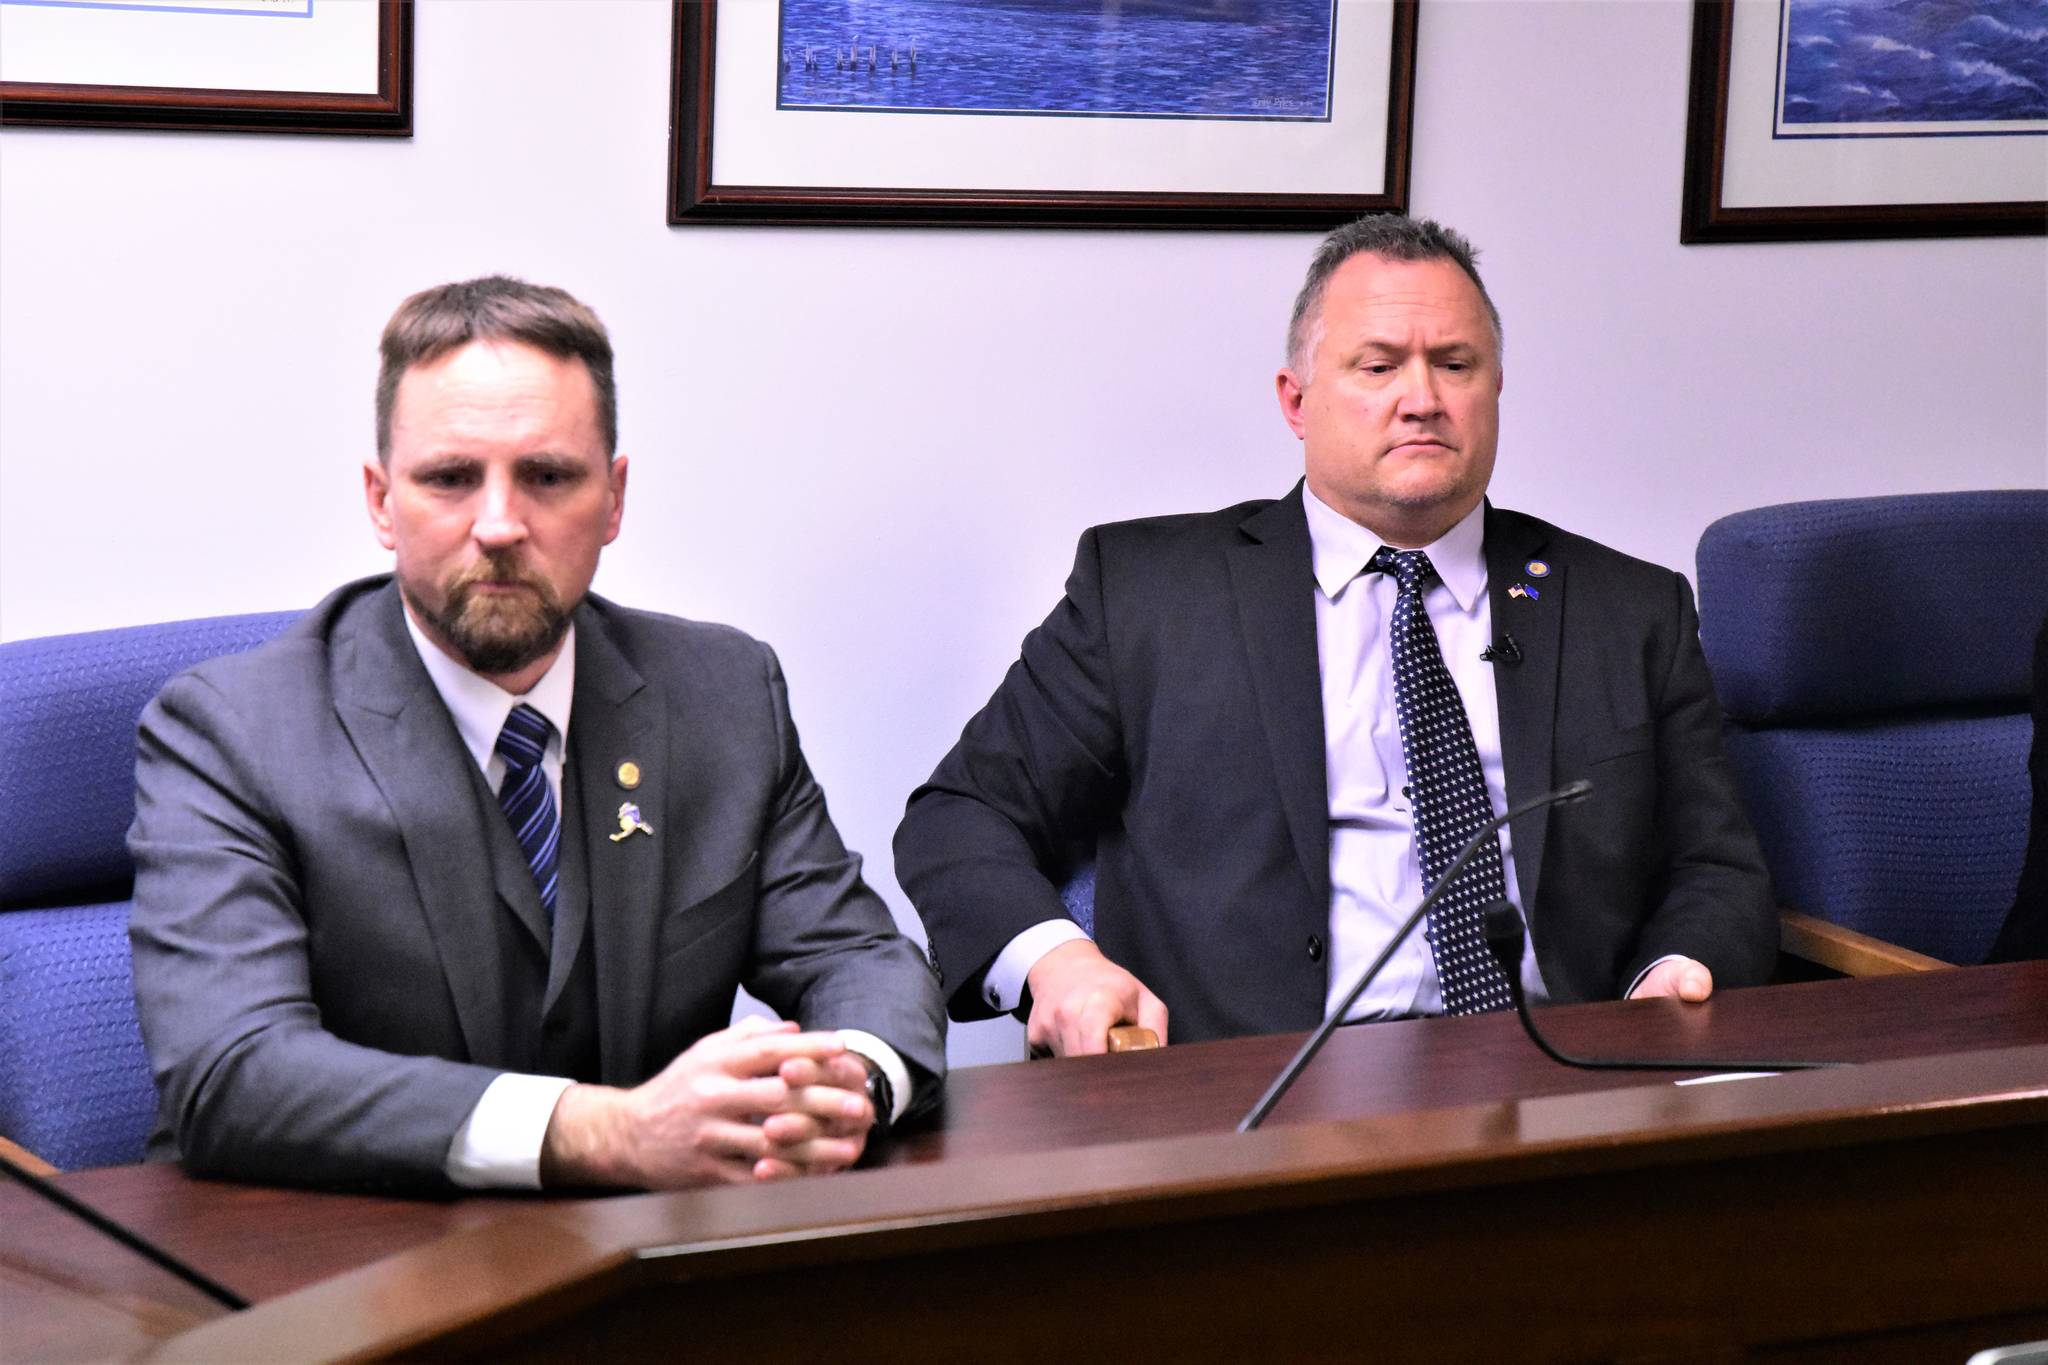 Sen. Mike Shower, R-Wasilla, and Rep. Ben Carpenter, R-Nikiski, at a press conference on Wednesday, Feb. 12, 2020. (Peter Segall | Juneau Empire)